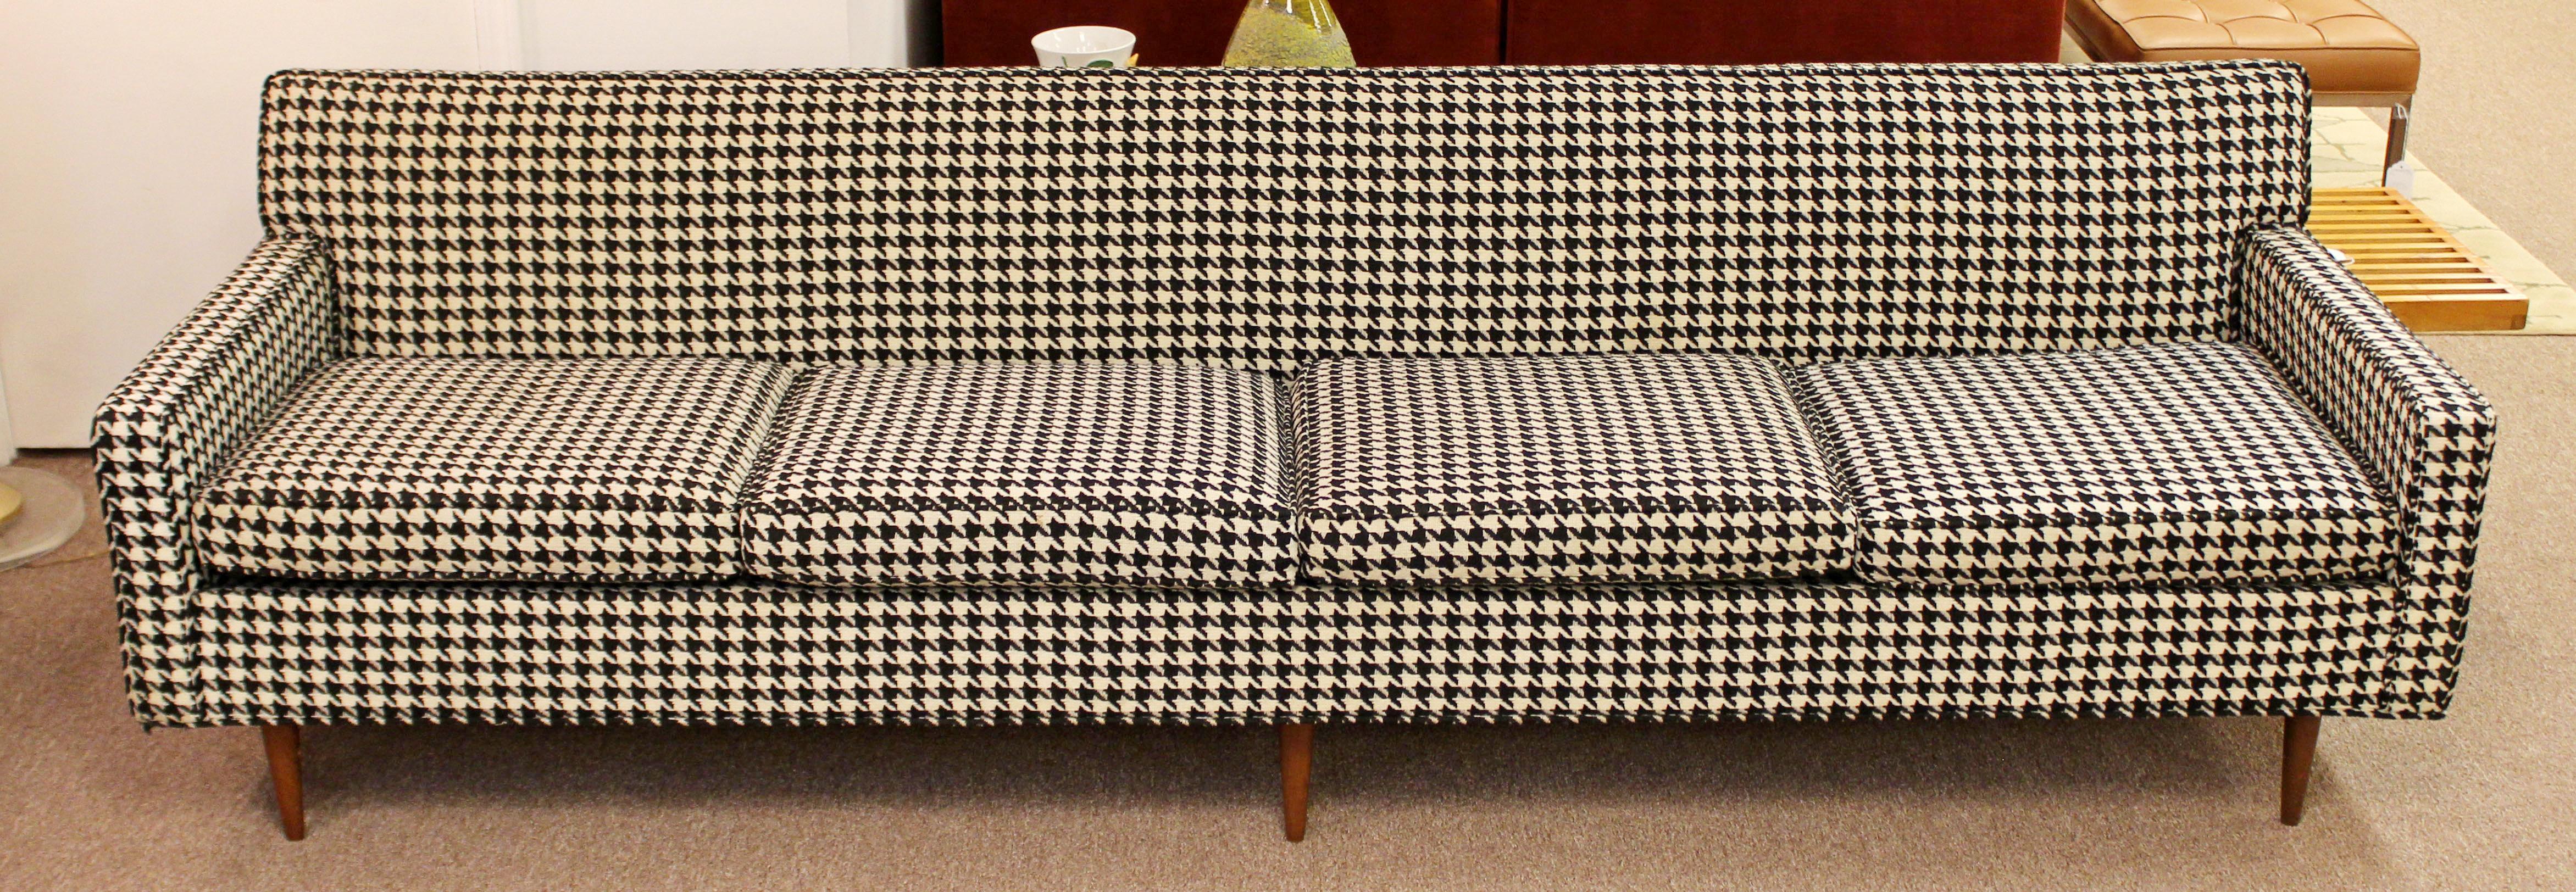 For your consideration is an incredible, early and rare, long sofa, with a houndstooth fabric, on wooden legs, by Milo Baughman, for Thayer Coggin, circa the 1960s. In very good condition. The dimensions are 96.5